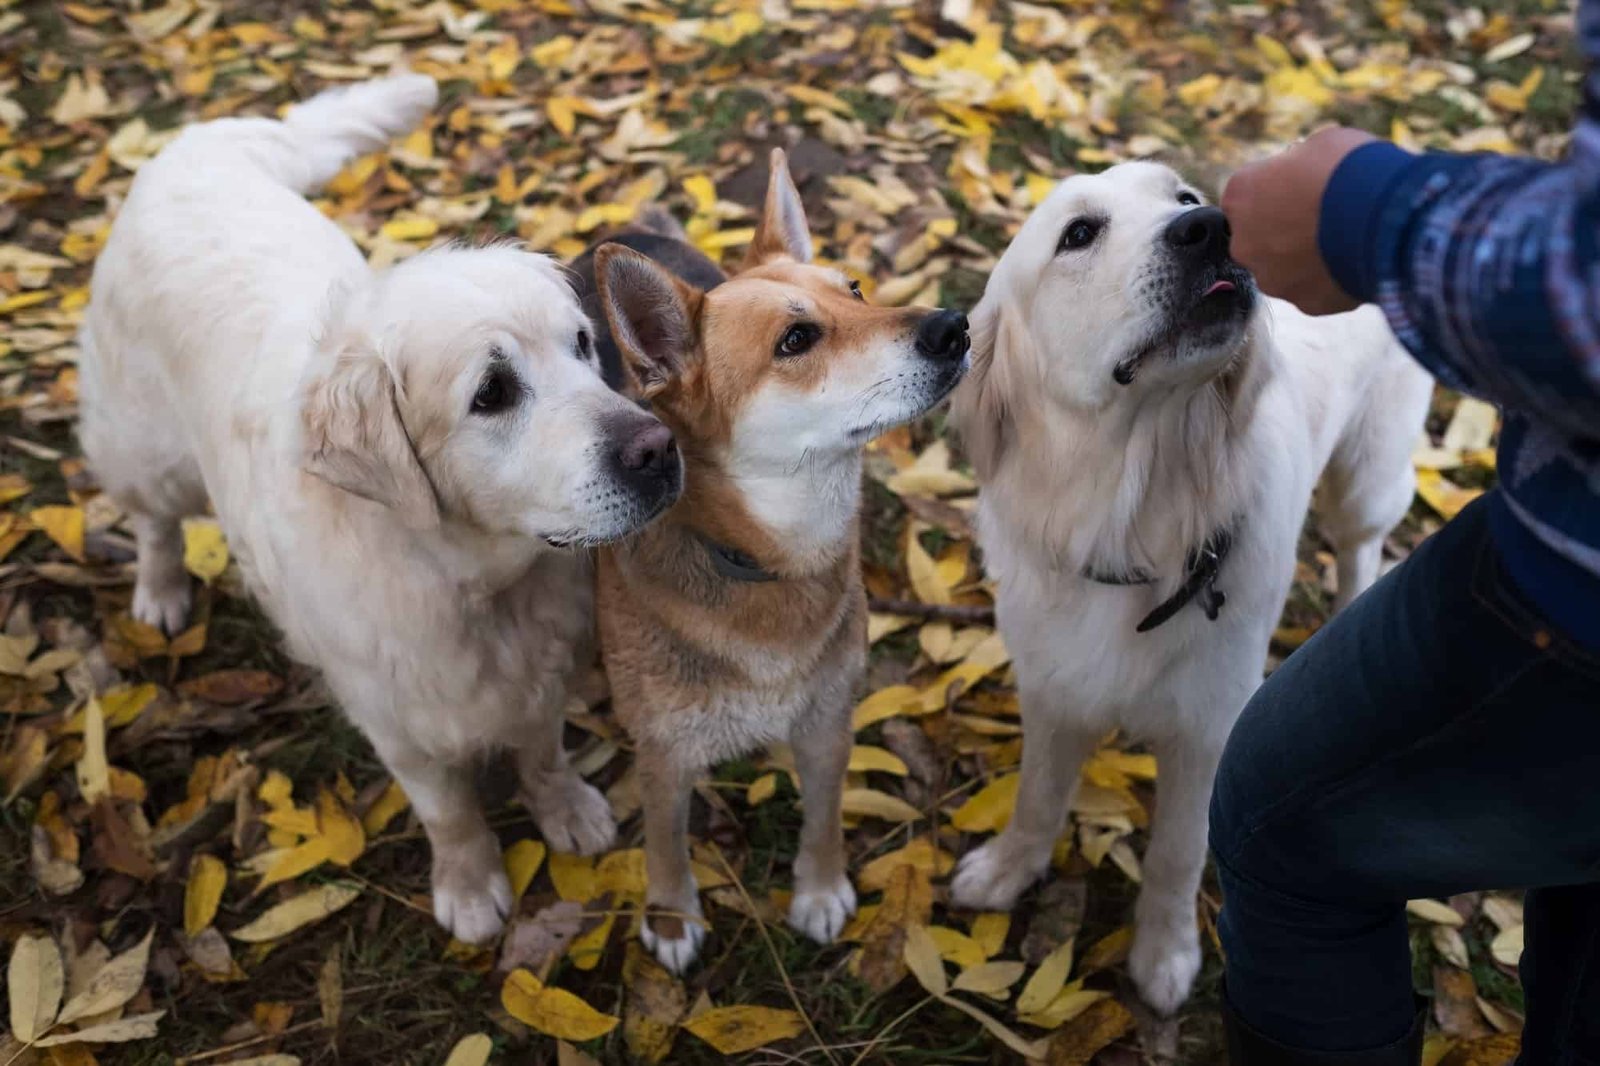 Giving golden retrievers and huskies a treat.